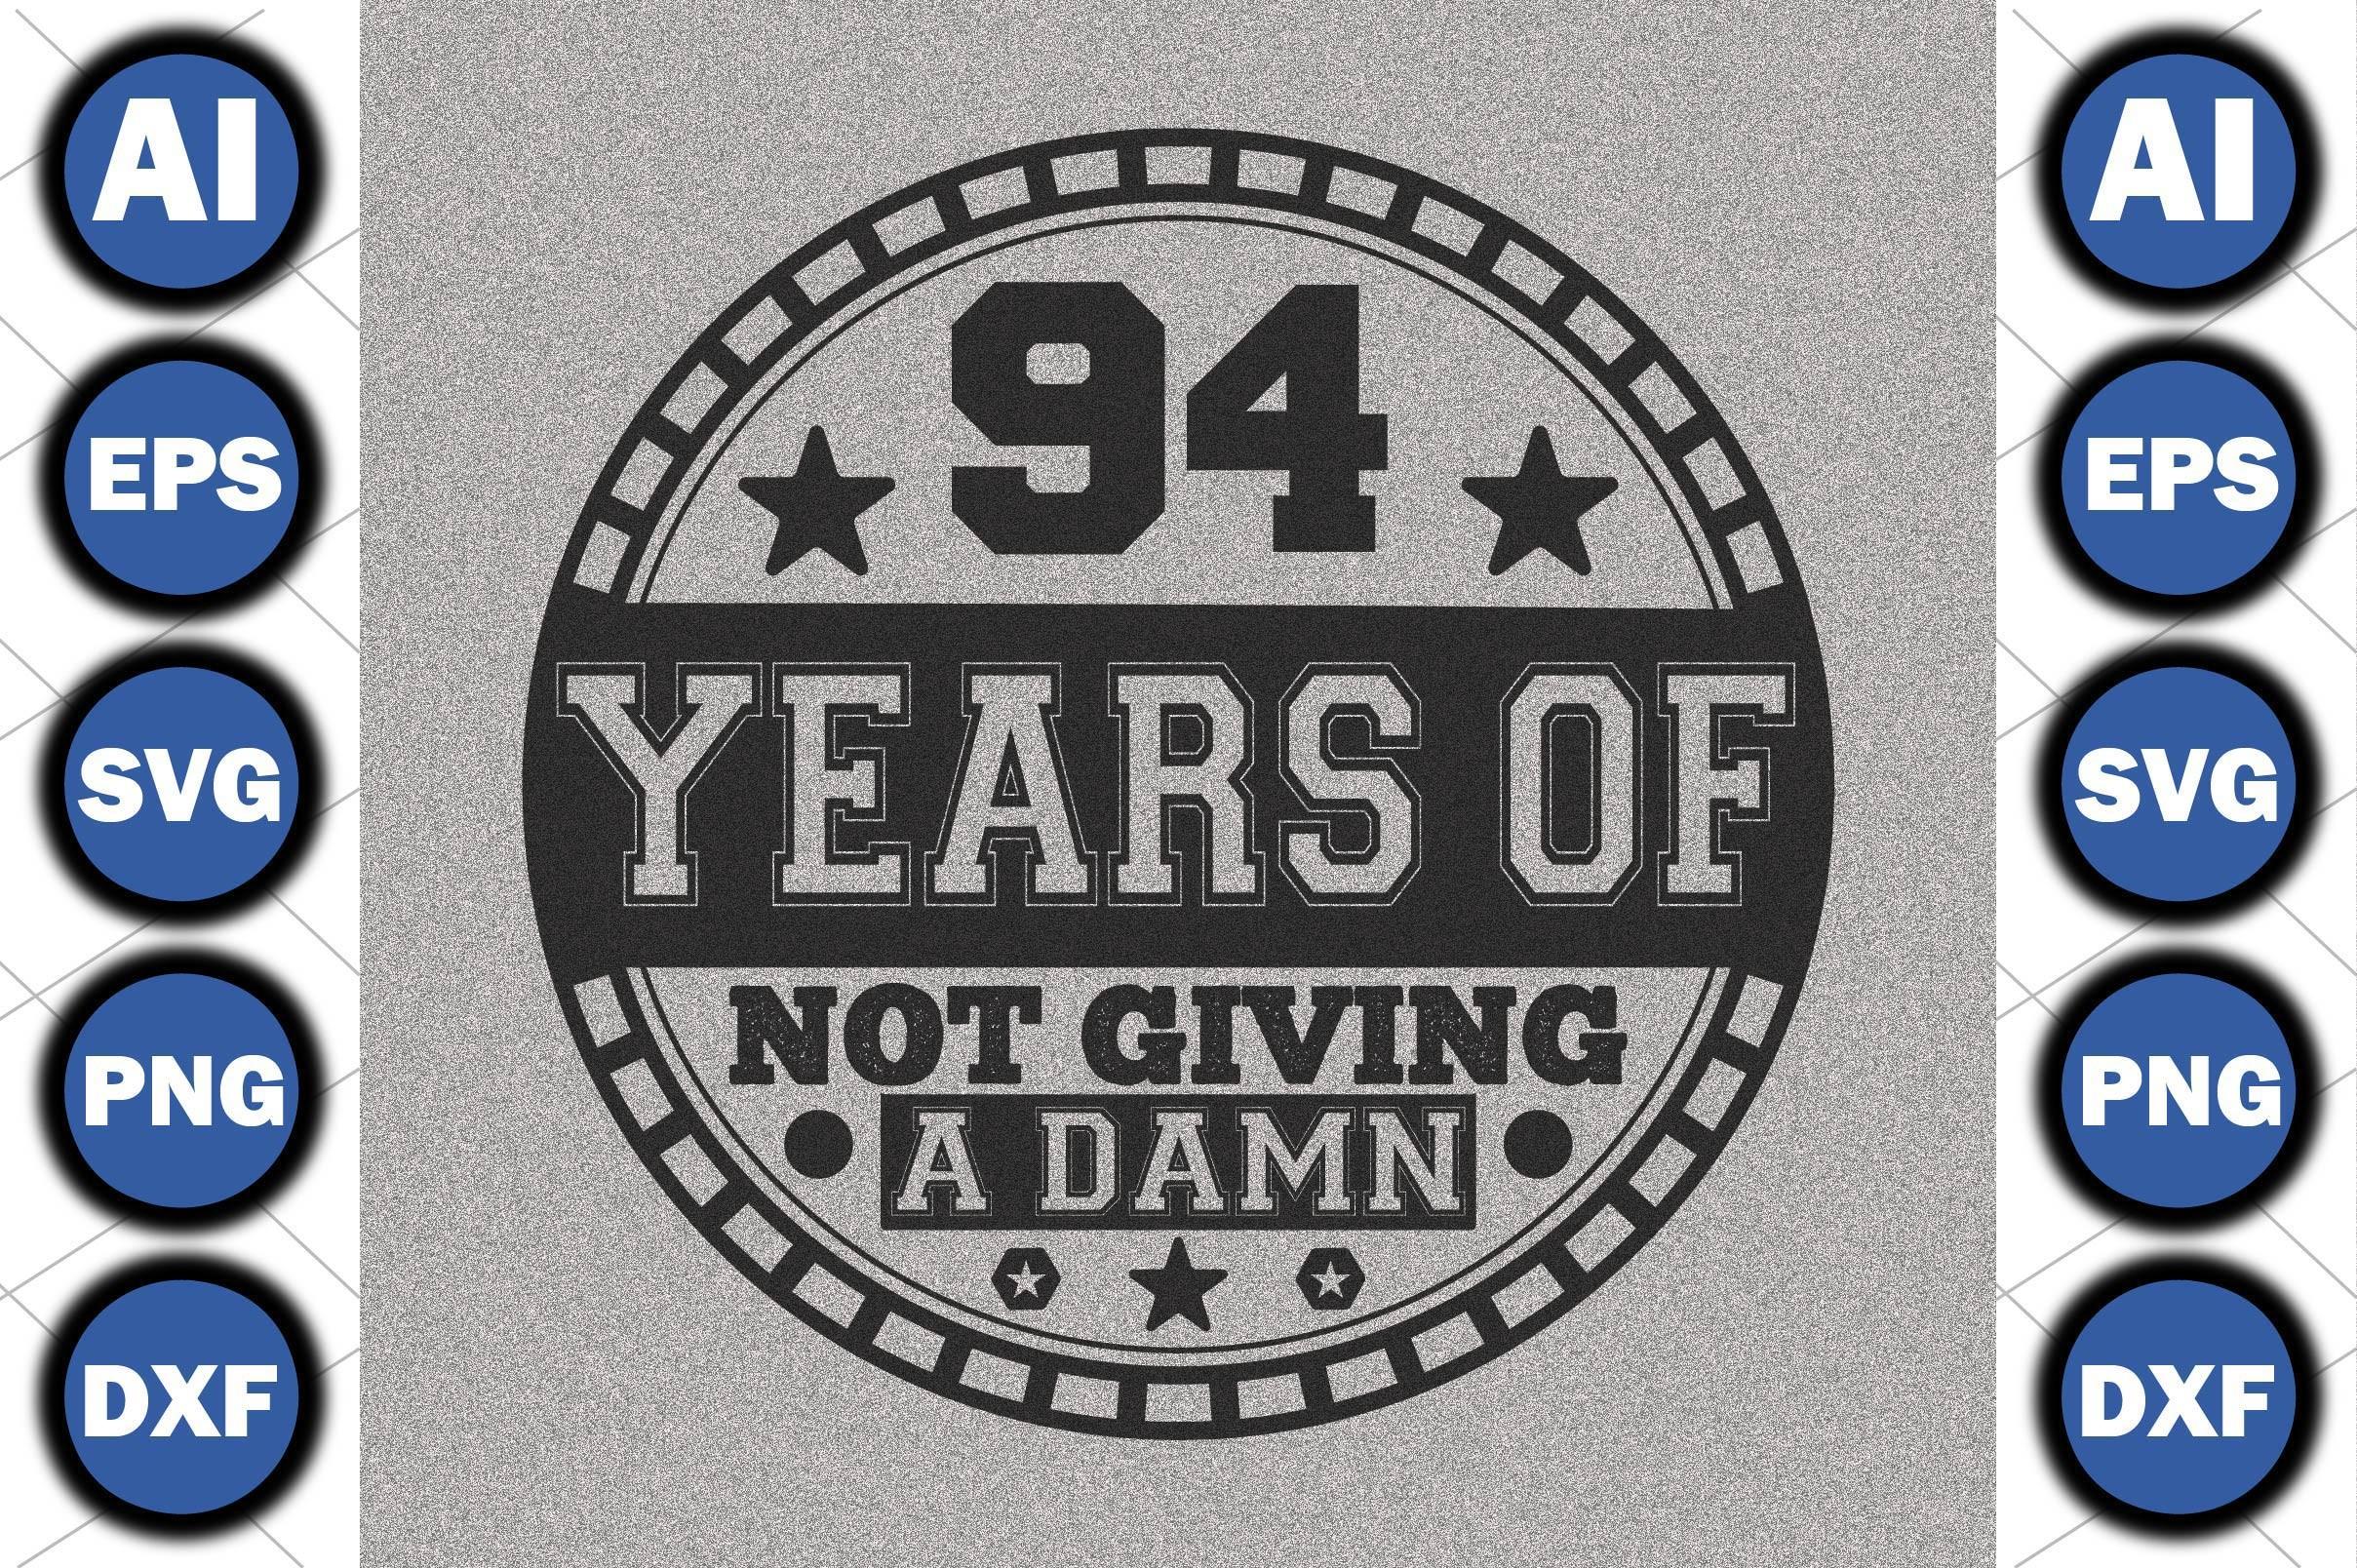 94 Years of Not Giving a Damn